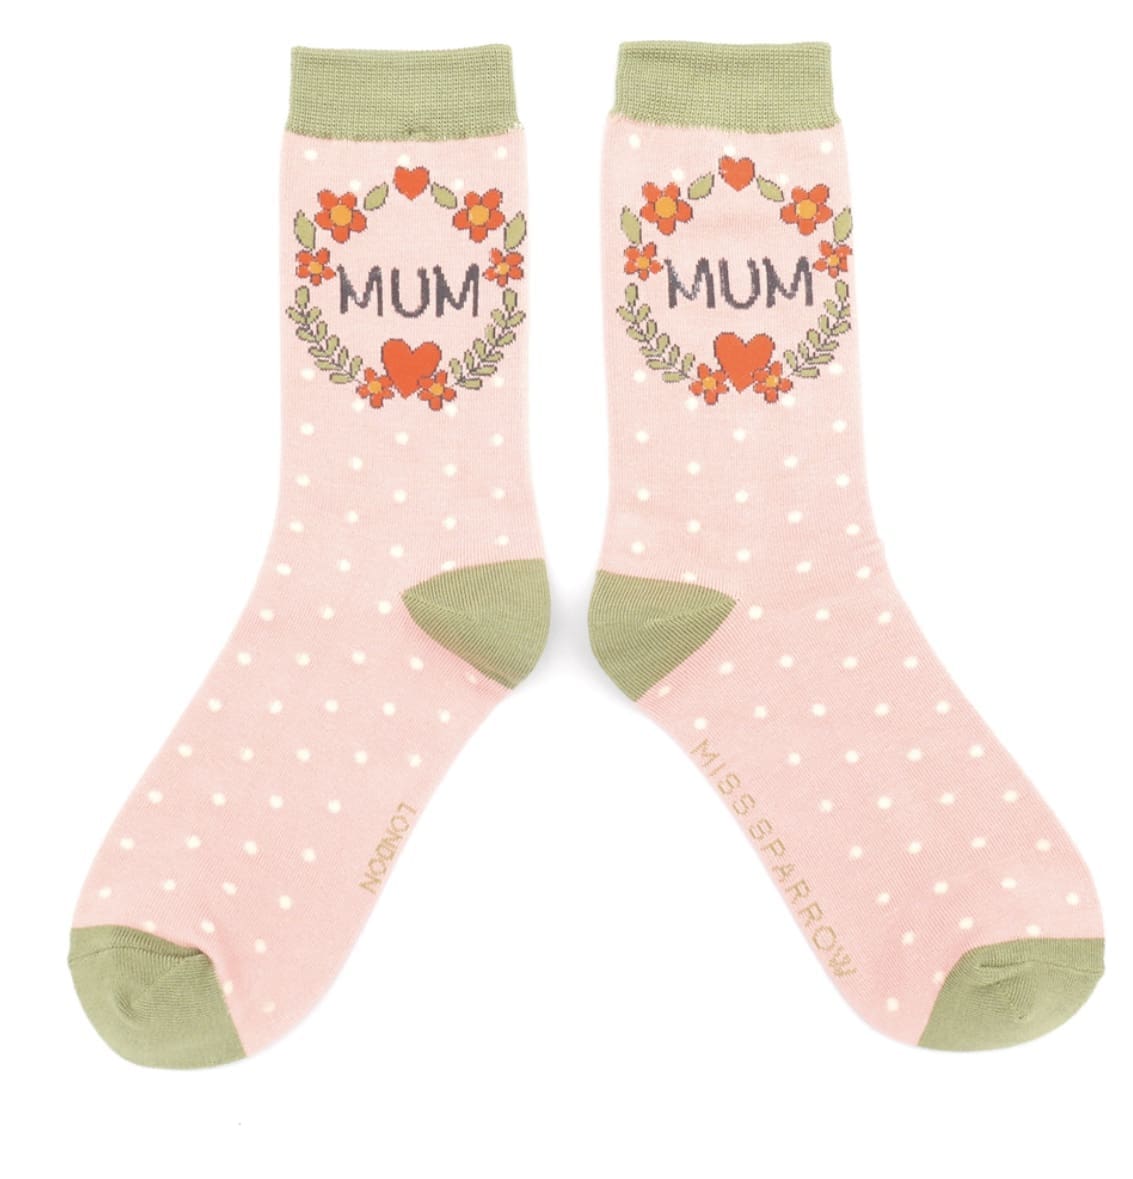 A pair of pink socks with the word mum on them.